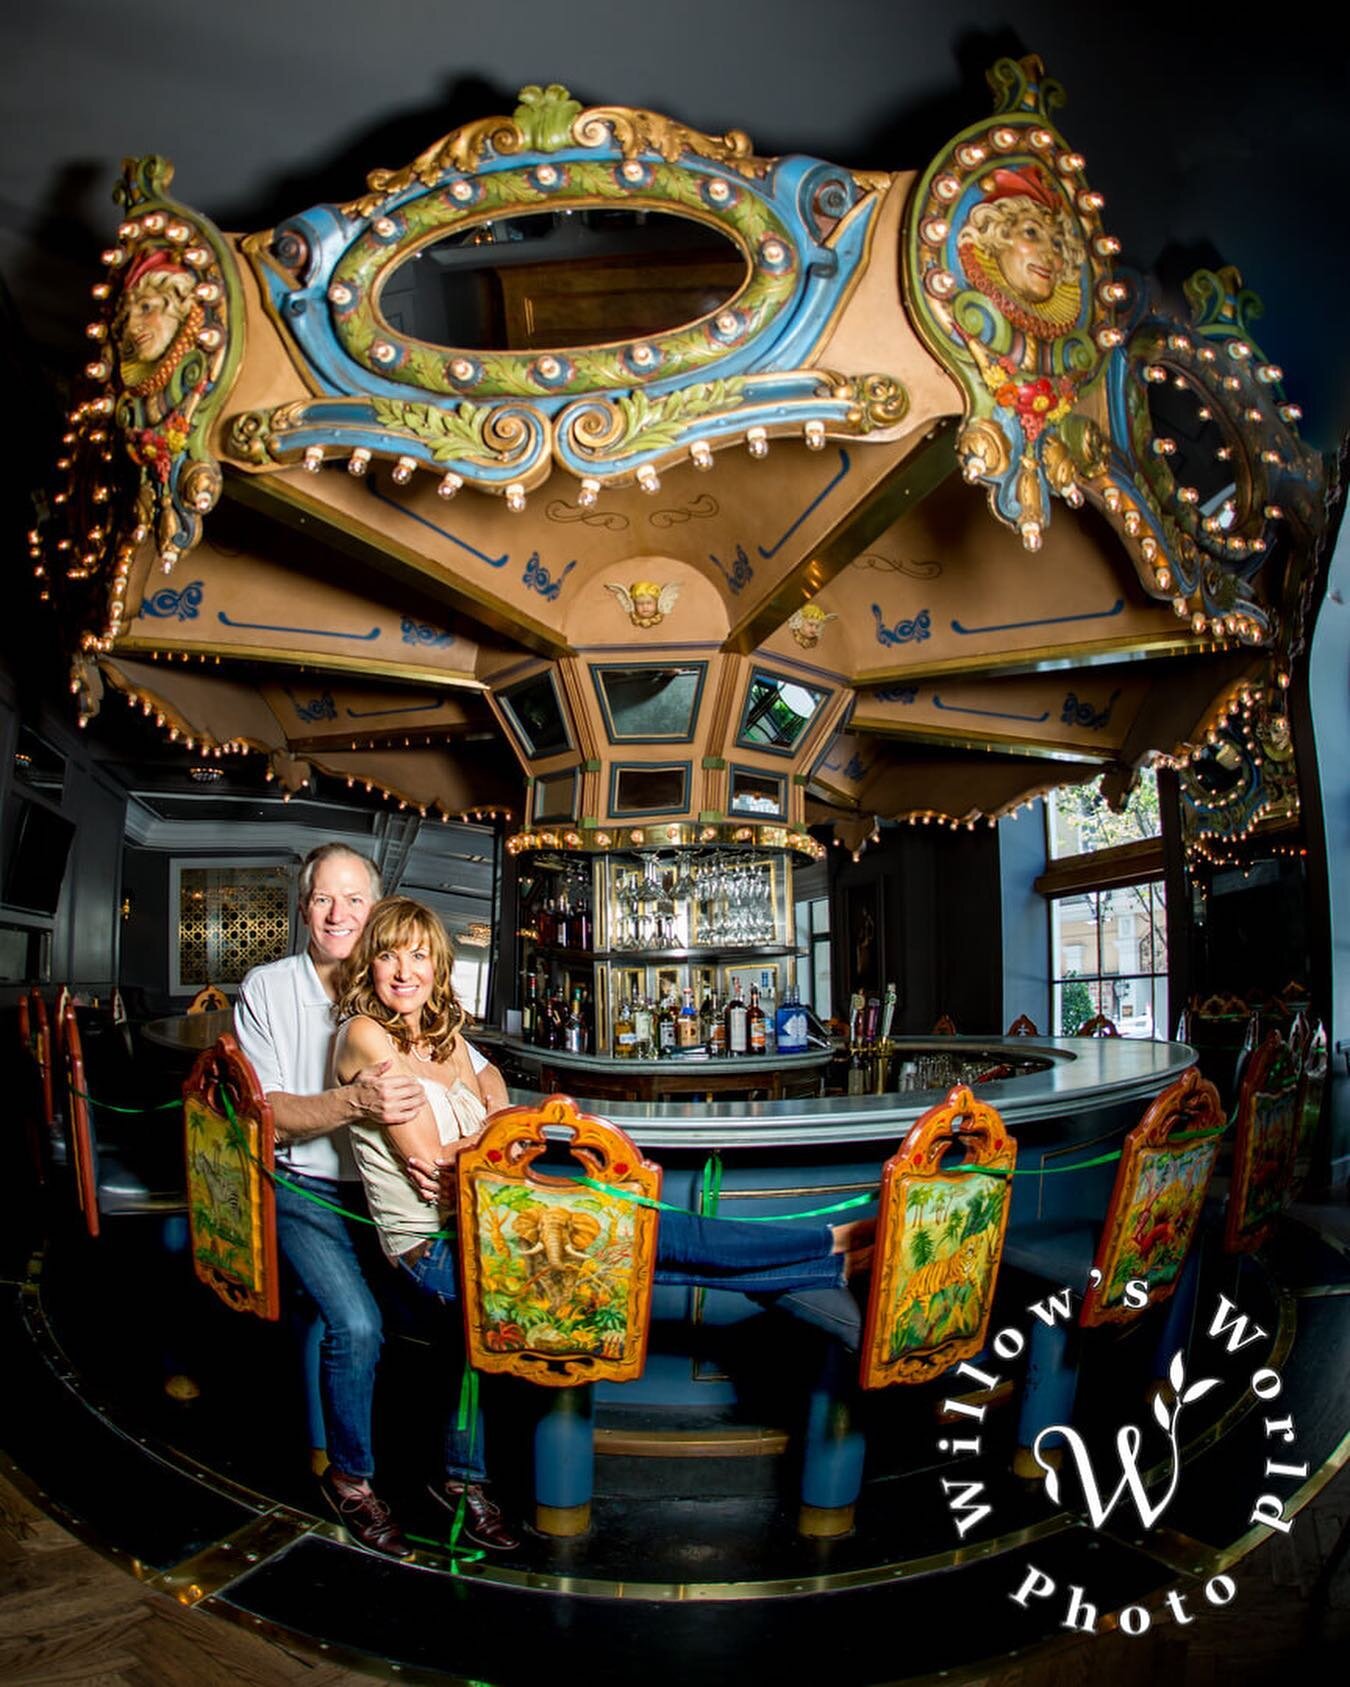 Allison and Bob spent their #SilverAnniversary in style - starting with a private photoshoot in the world famous Carousel Bar! The awesome folks at  Hotel Monteleone  even let me climb behind the bar (!!!) and flip the switch to make it rotate! The h